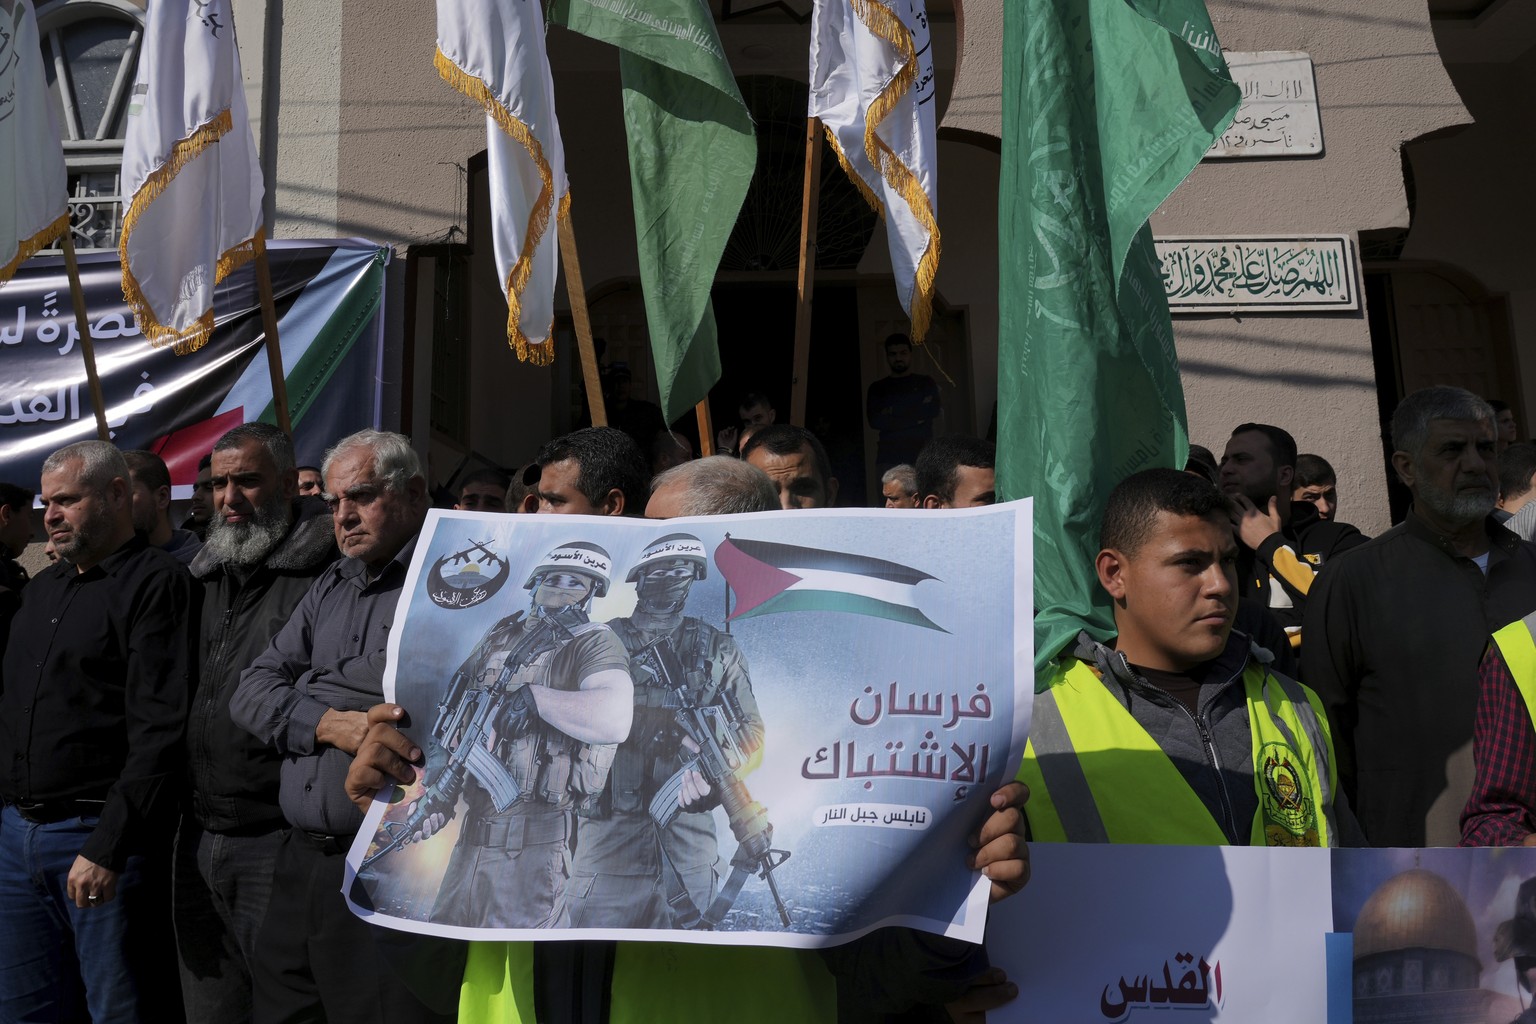 Hamas supporters wave green Islamic flags during a rally in solidarity with Palestinian residents of the West Bank and Jerusalem, after Friday prayer in front of Salah elDein Mosque at the main road o ...